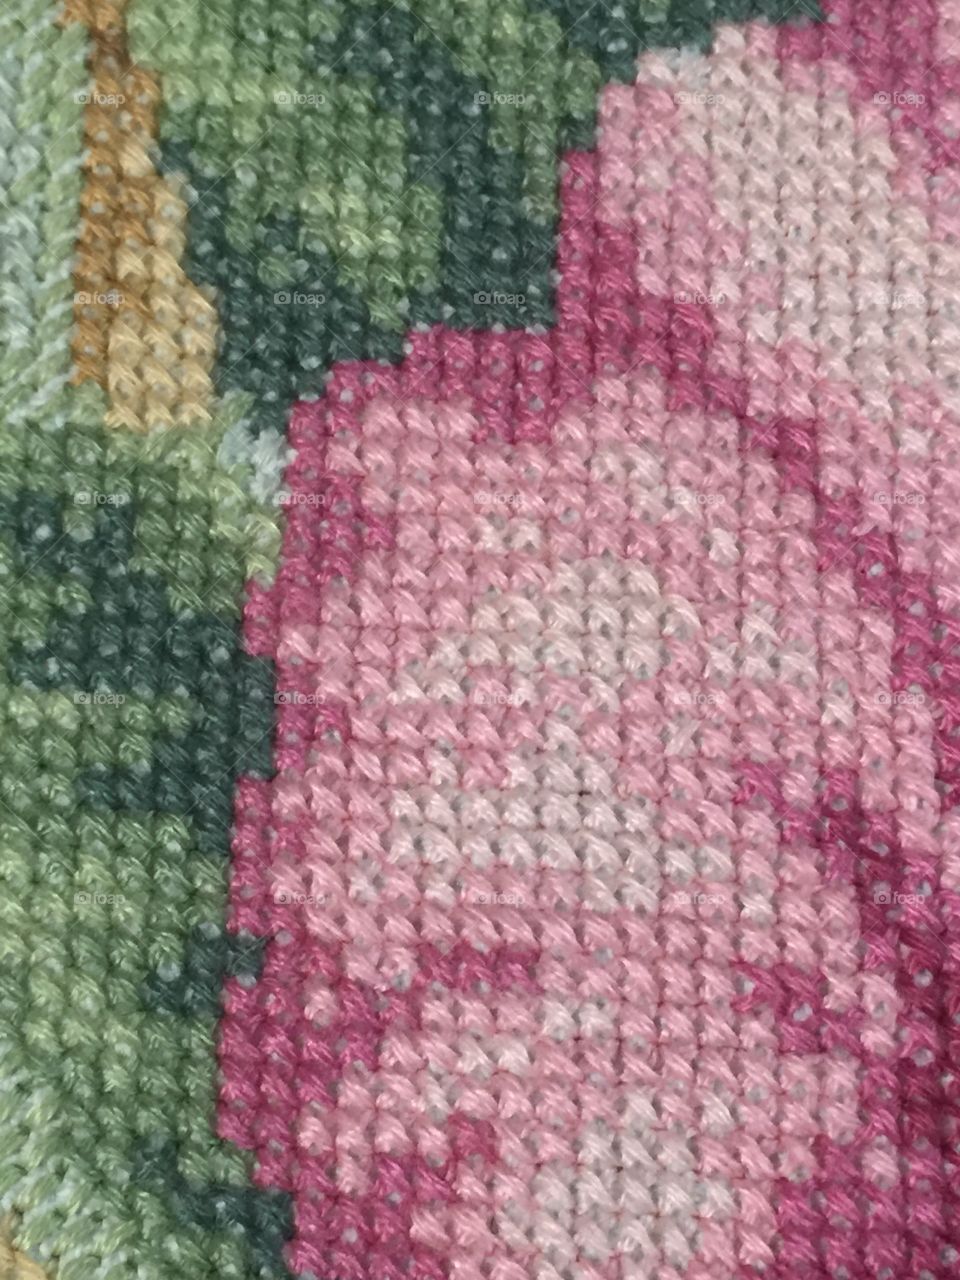 Close up view of cross stitch embroidery